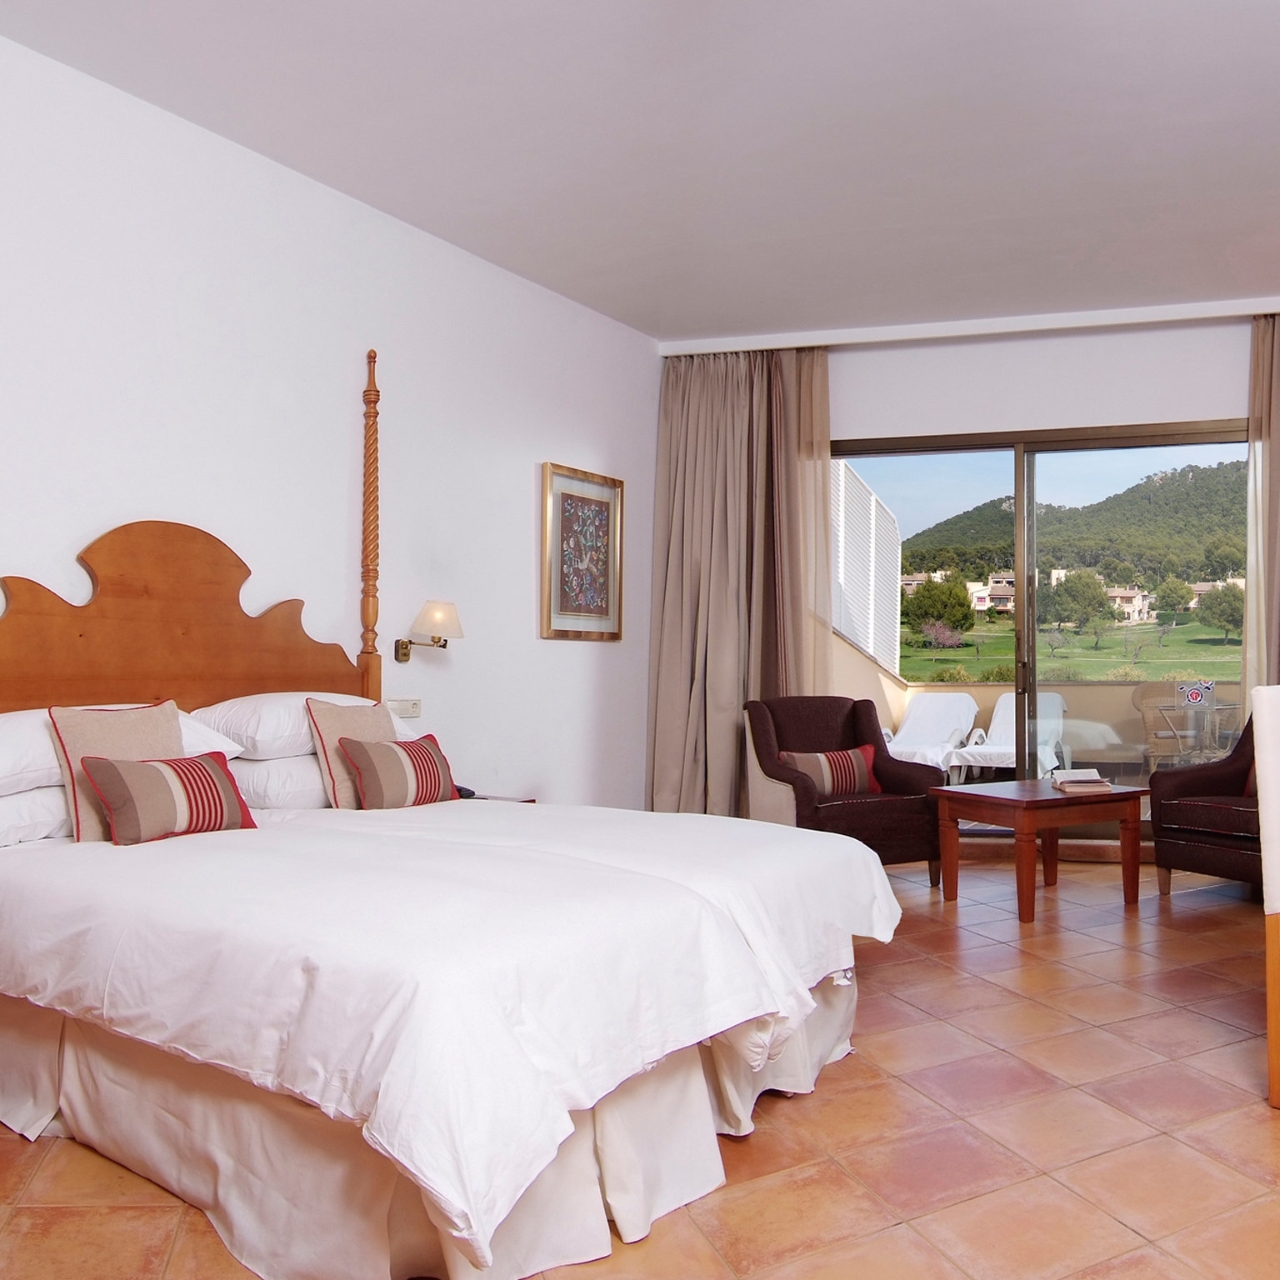 Hotel Golf Santa Ponsa Spain- at HRS with free services